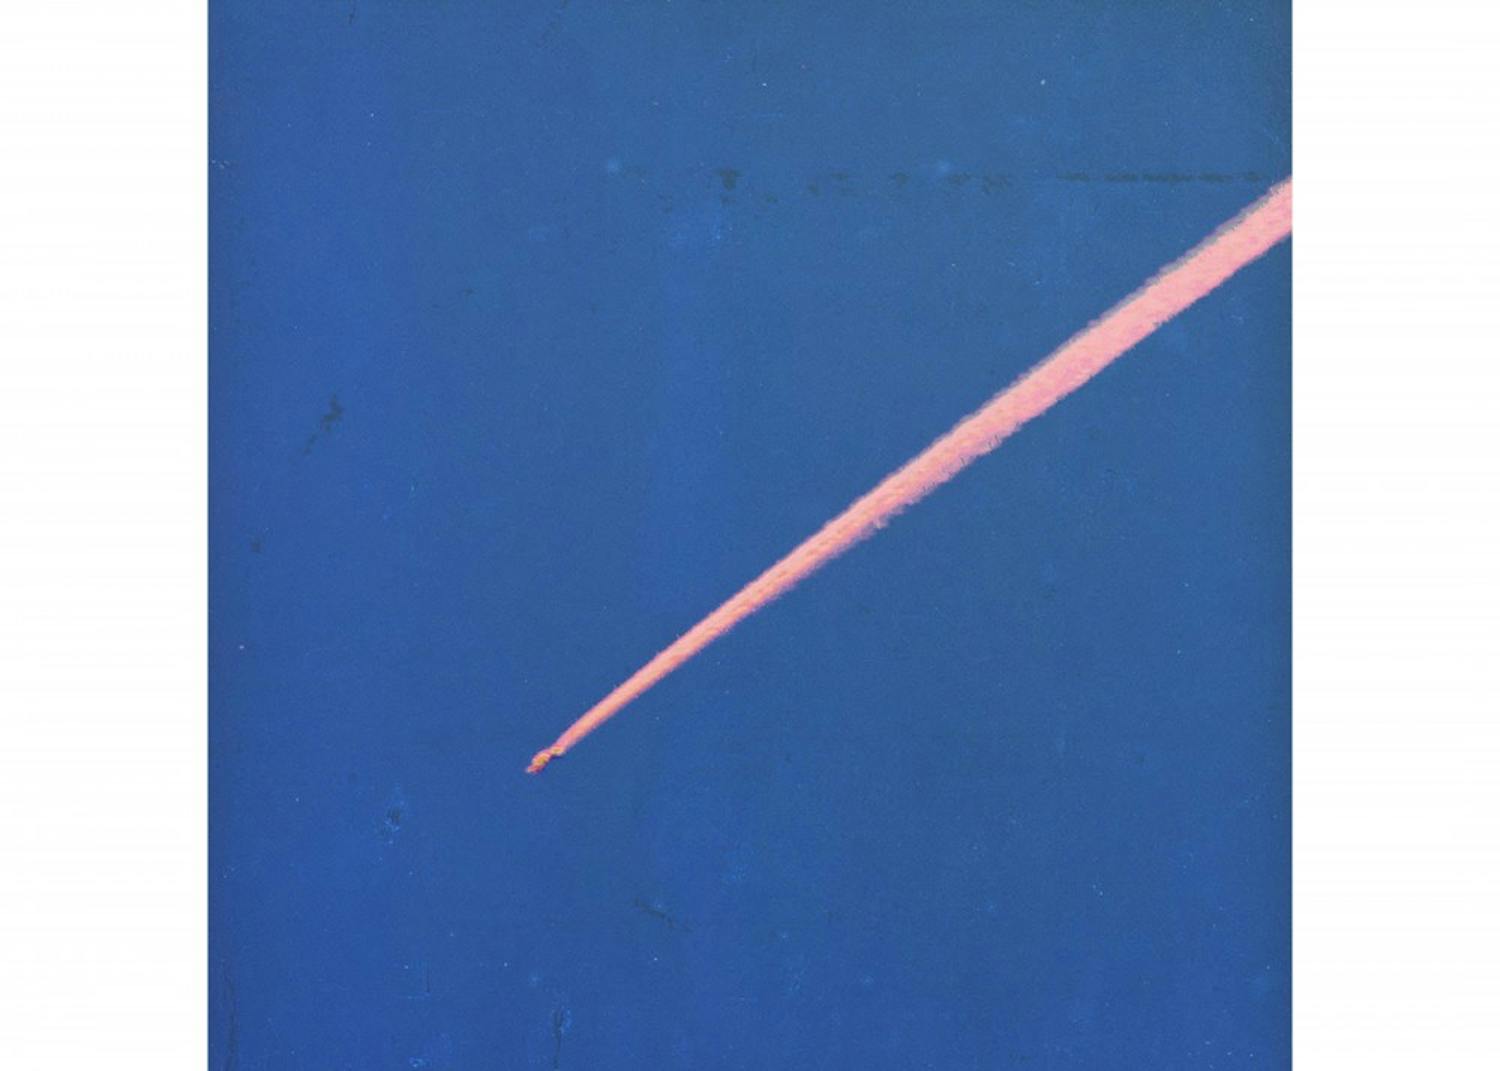 Archy Ivan Marshall, who performs under the stage name King Krule, released "The OOZ" on Oct. 13. The album is Marshall's second full-length work.